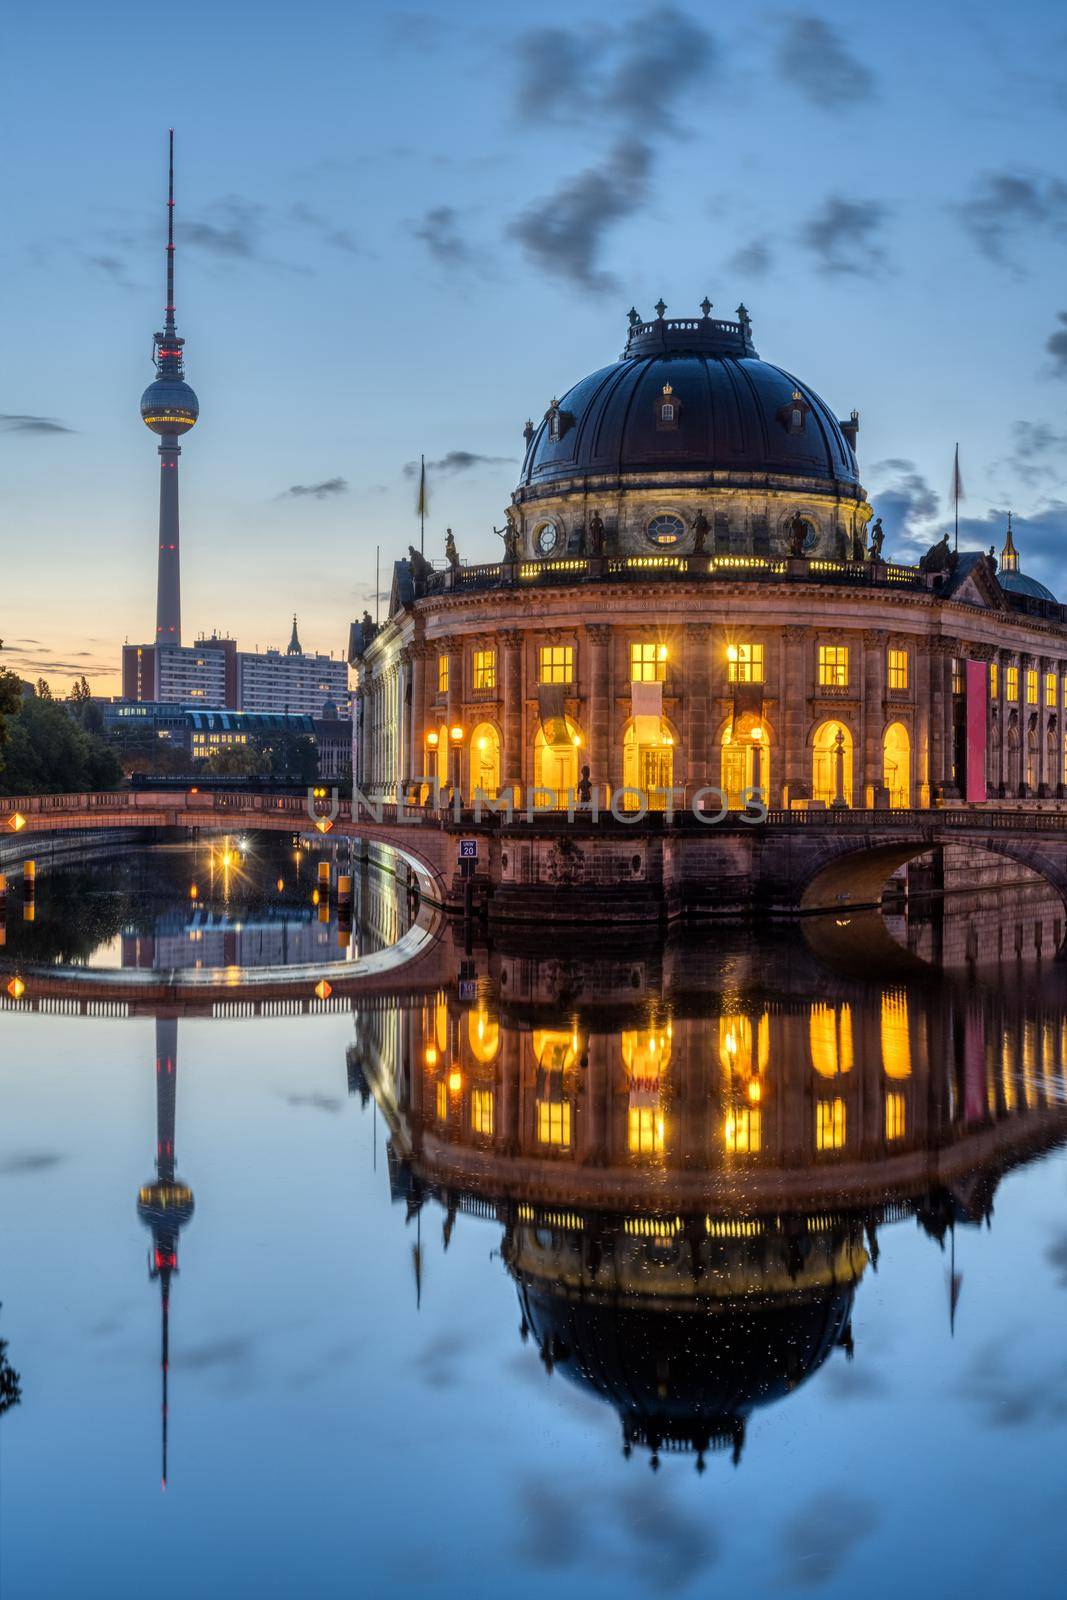 The Bode Museum and the Television Tower at dawn by elxeneize